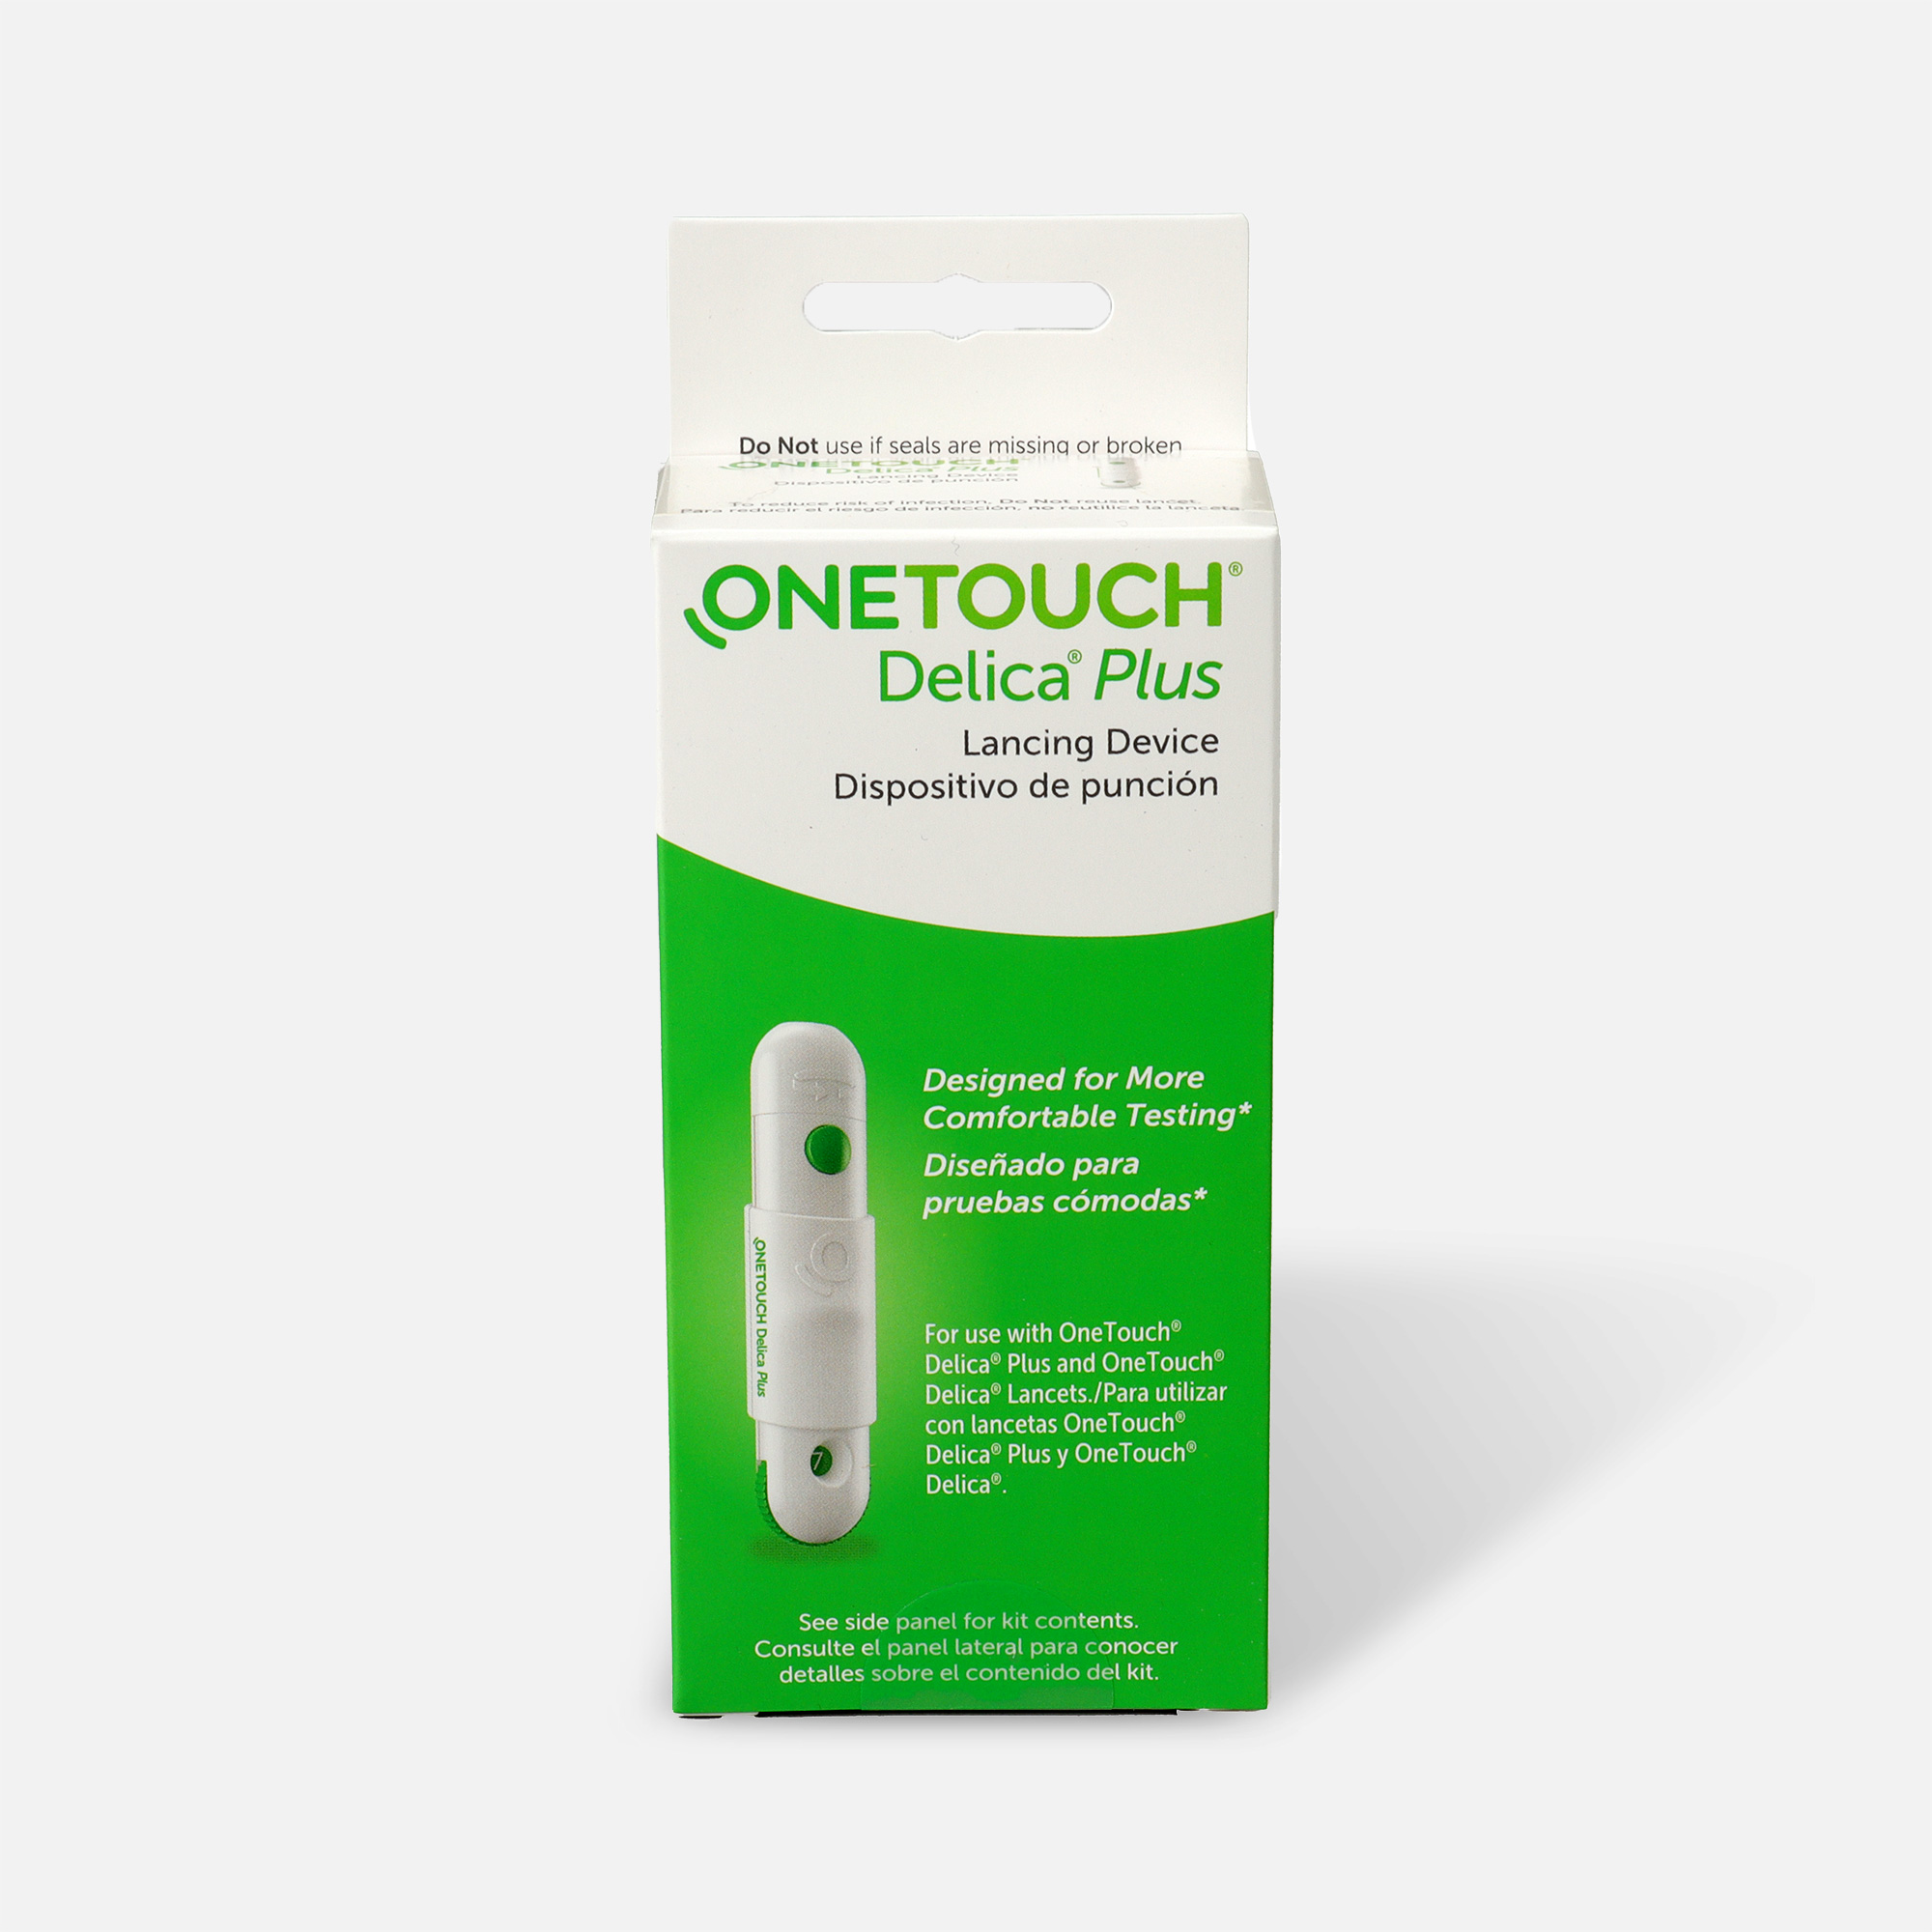 Onetouch delica plus. One Touch select прокалыватель. Прокалыватель Ван тач Делика. Ланцеты Ван тач Делика плюс. Ручка one Touch Delica.